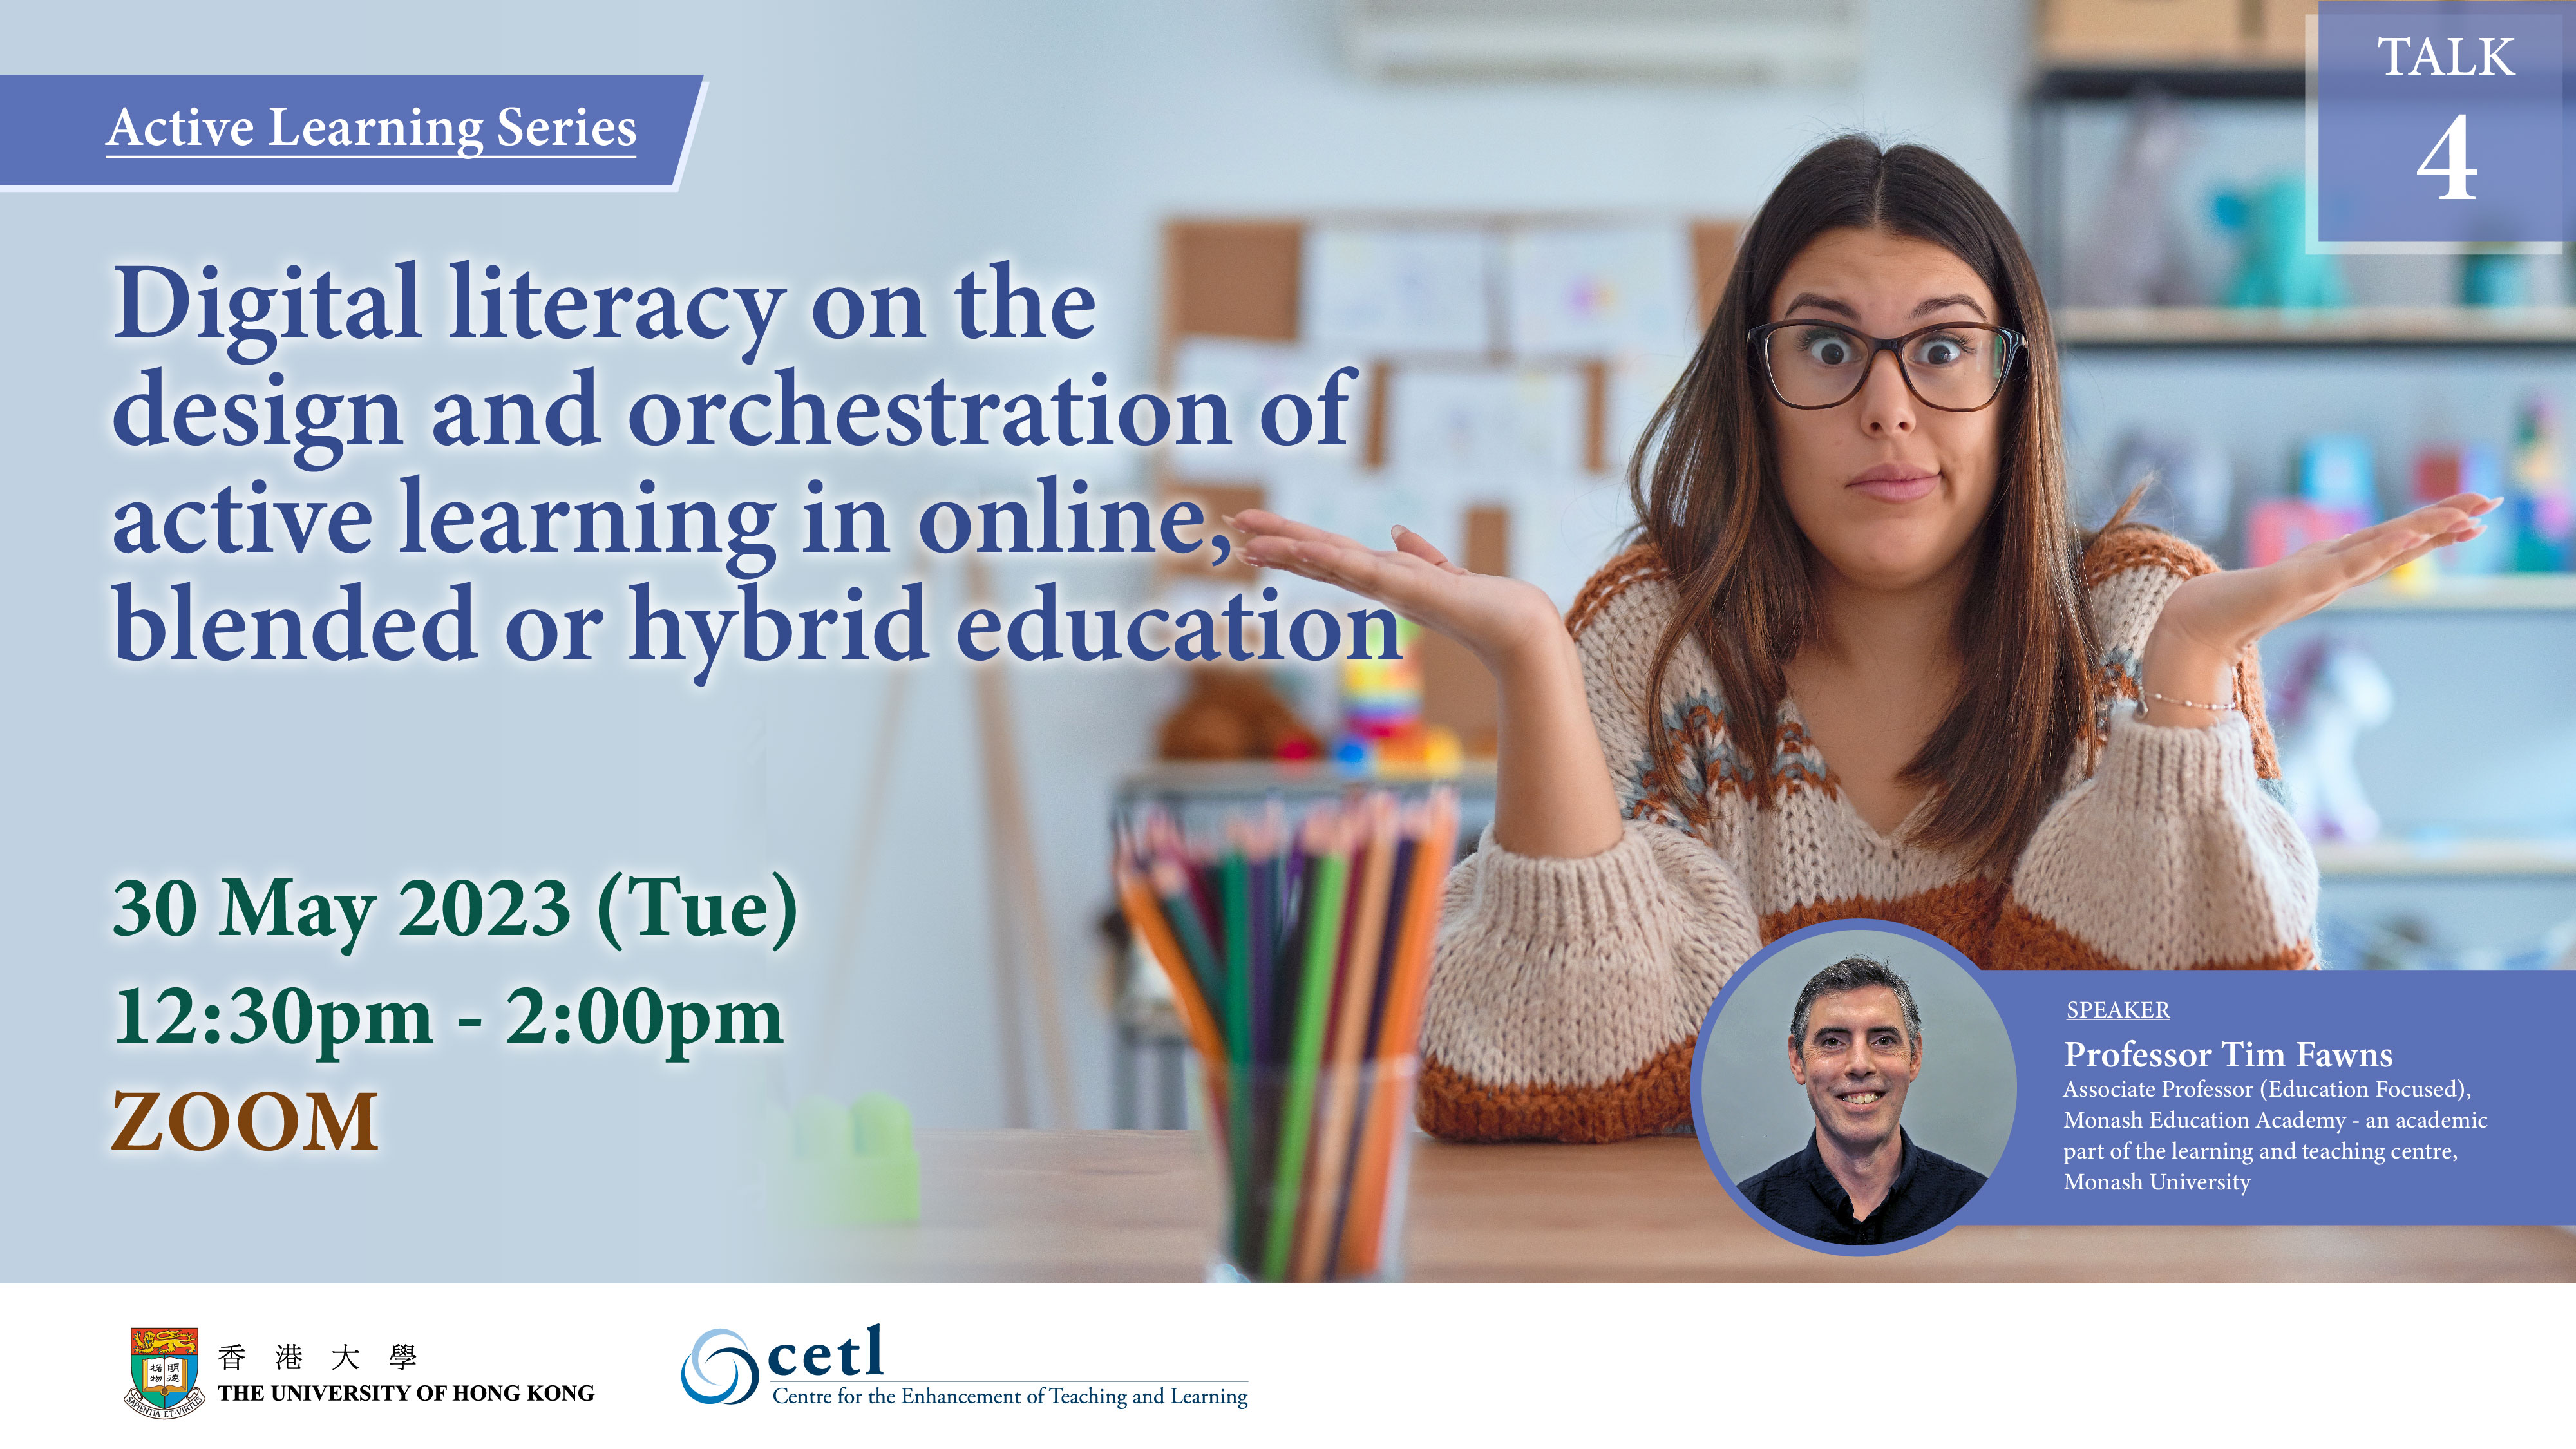 Talk 4: Digital literacy on the design and orchestration of active learning in online, blended or hybrid education